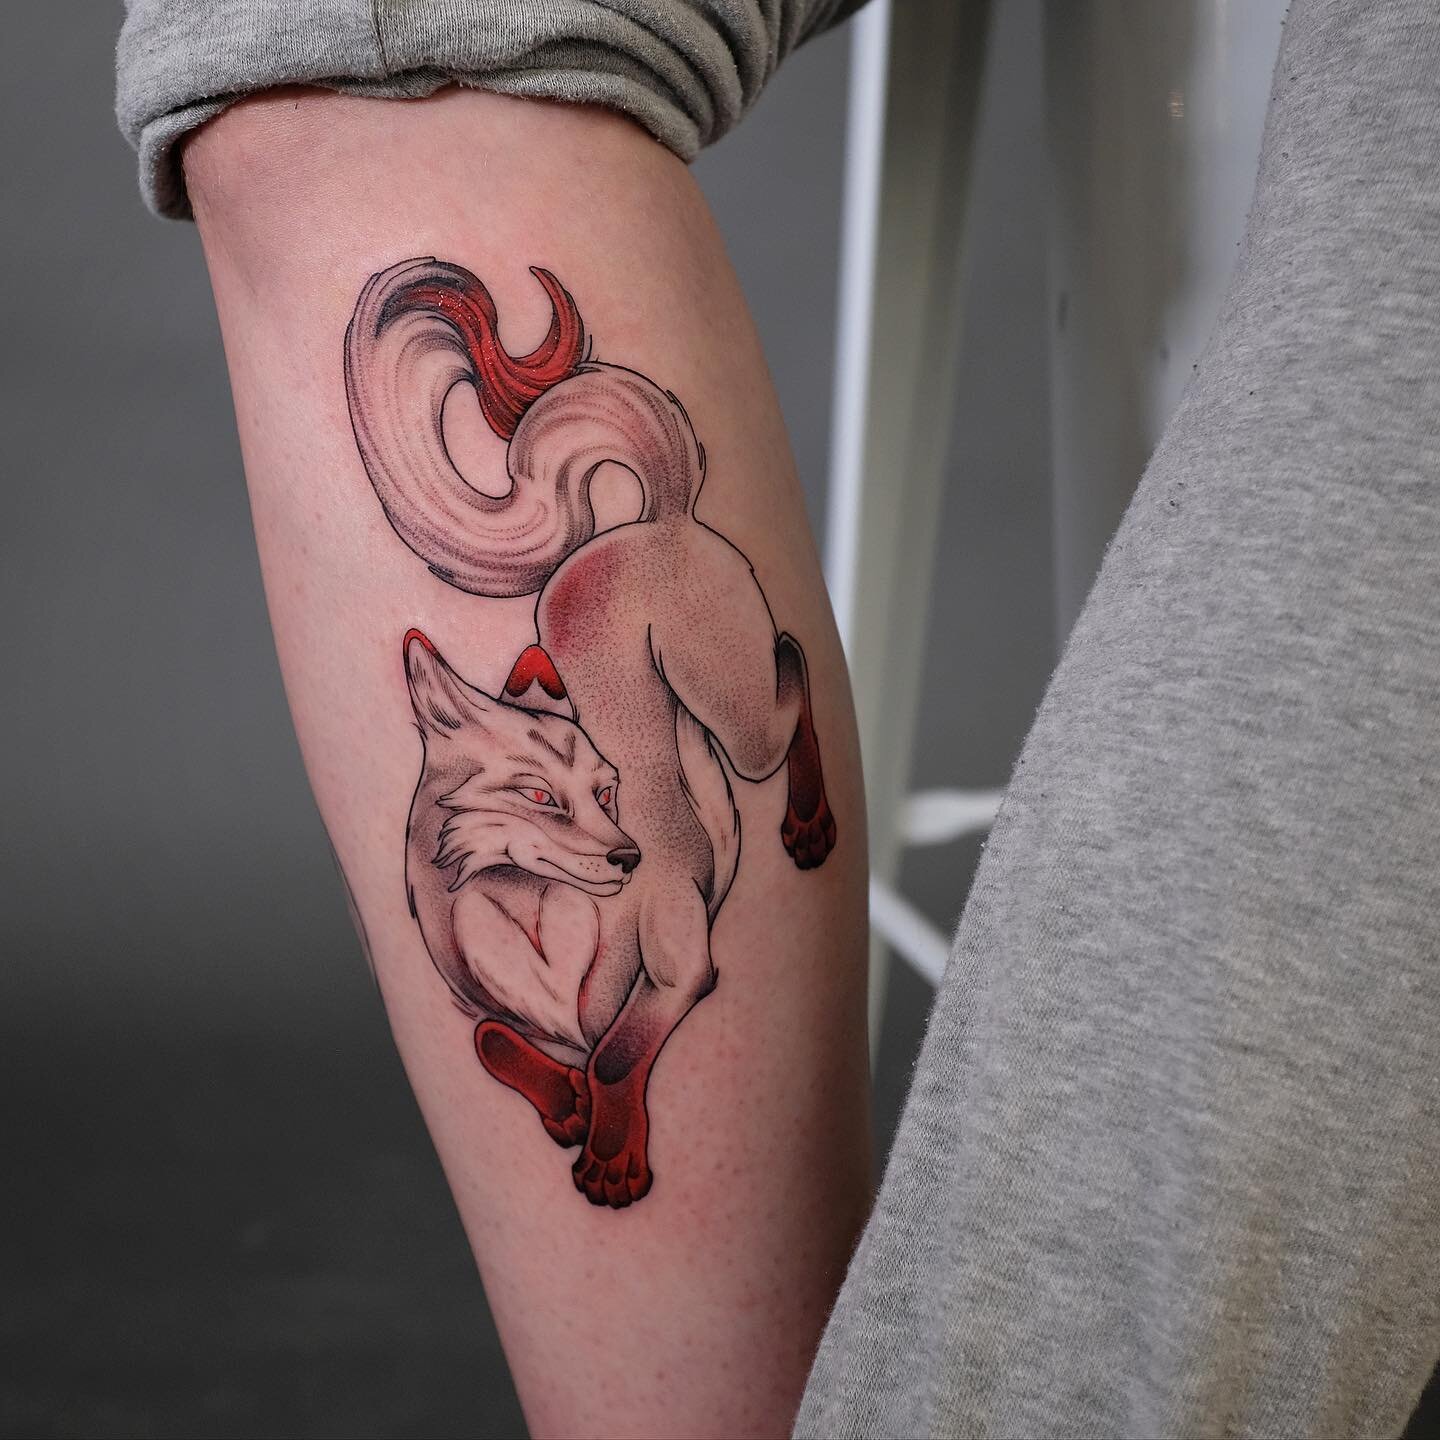 Heart fox to match a heart cat I did last year! Keep swiping for the healed cat and a little video of the both of them!

#yyz #toronto #torontotattoo #torontotattooartist #GTA #the6ix #redink #inked #fox #foxtattoo #nature #photography #beautiful #in